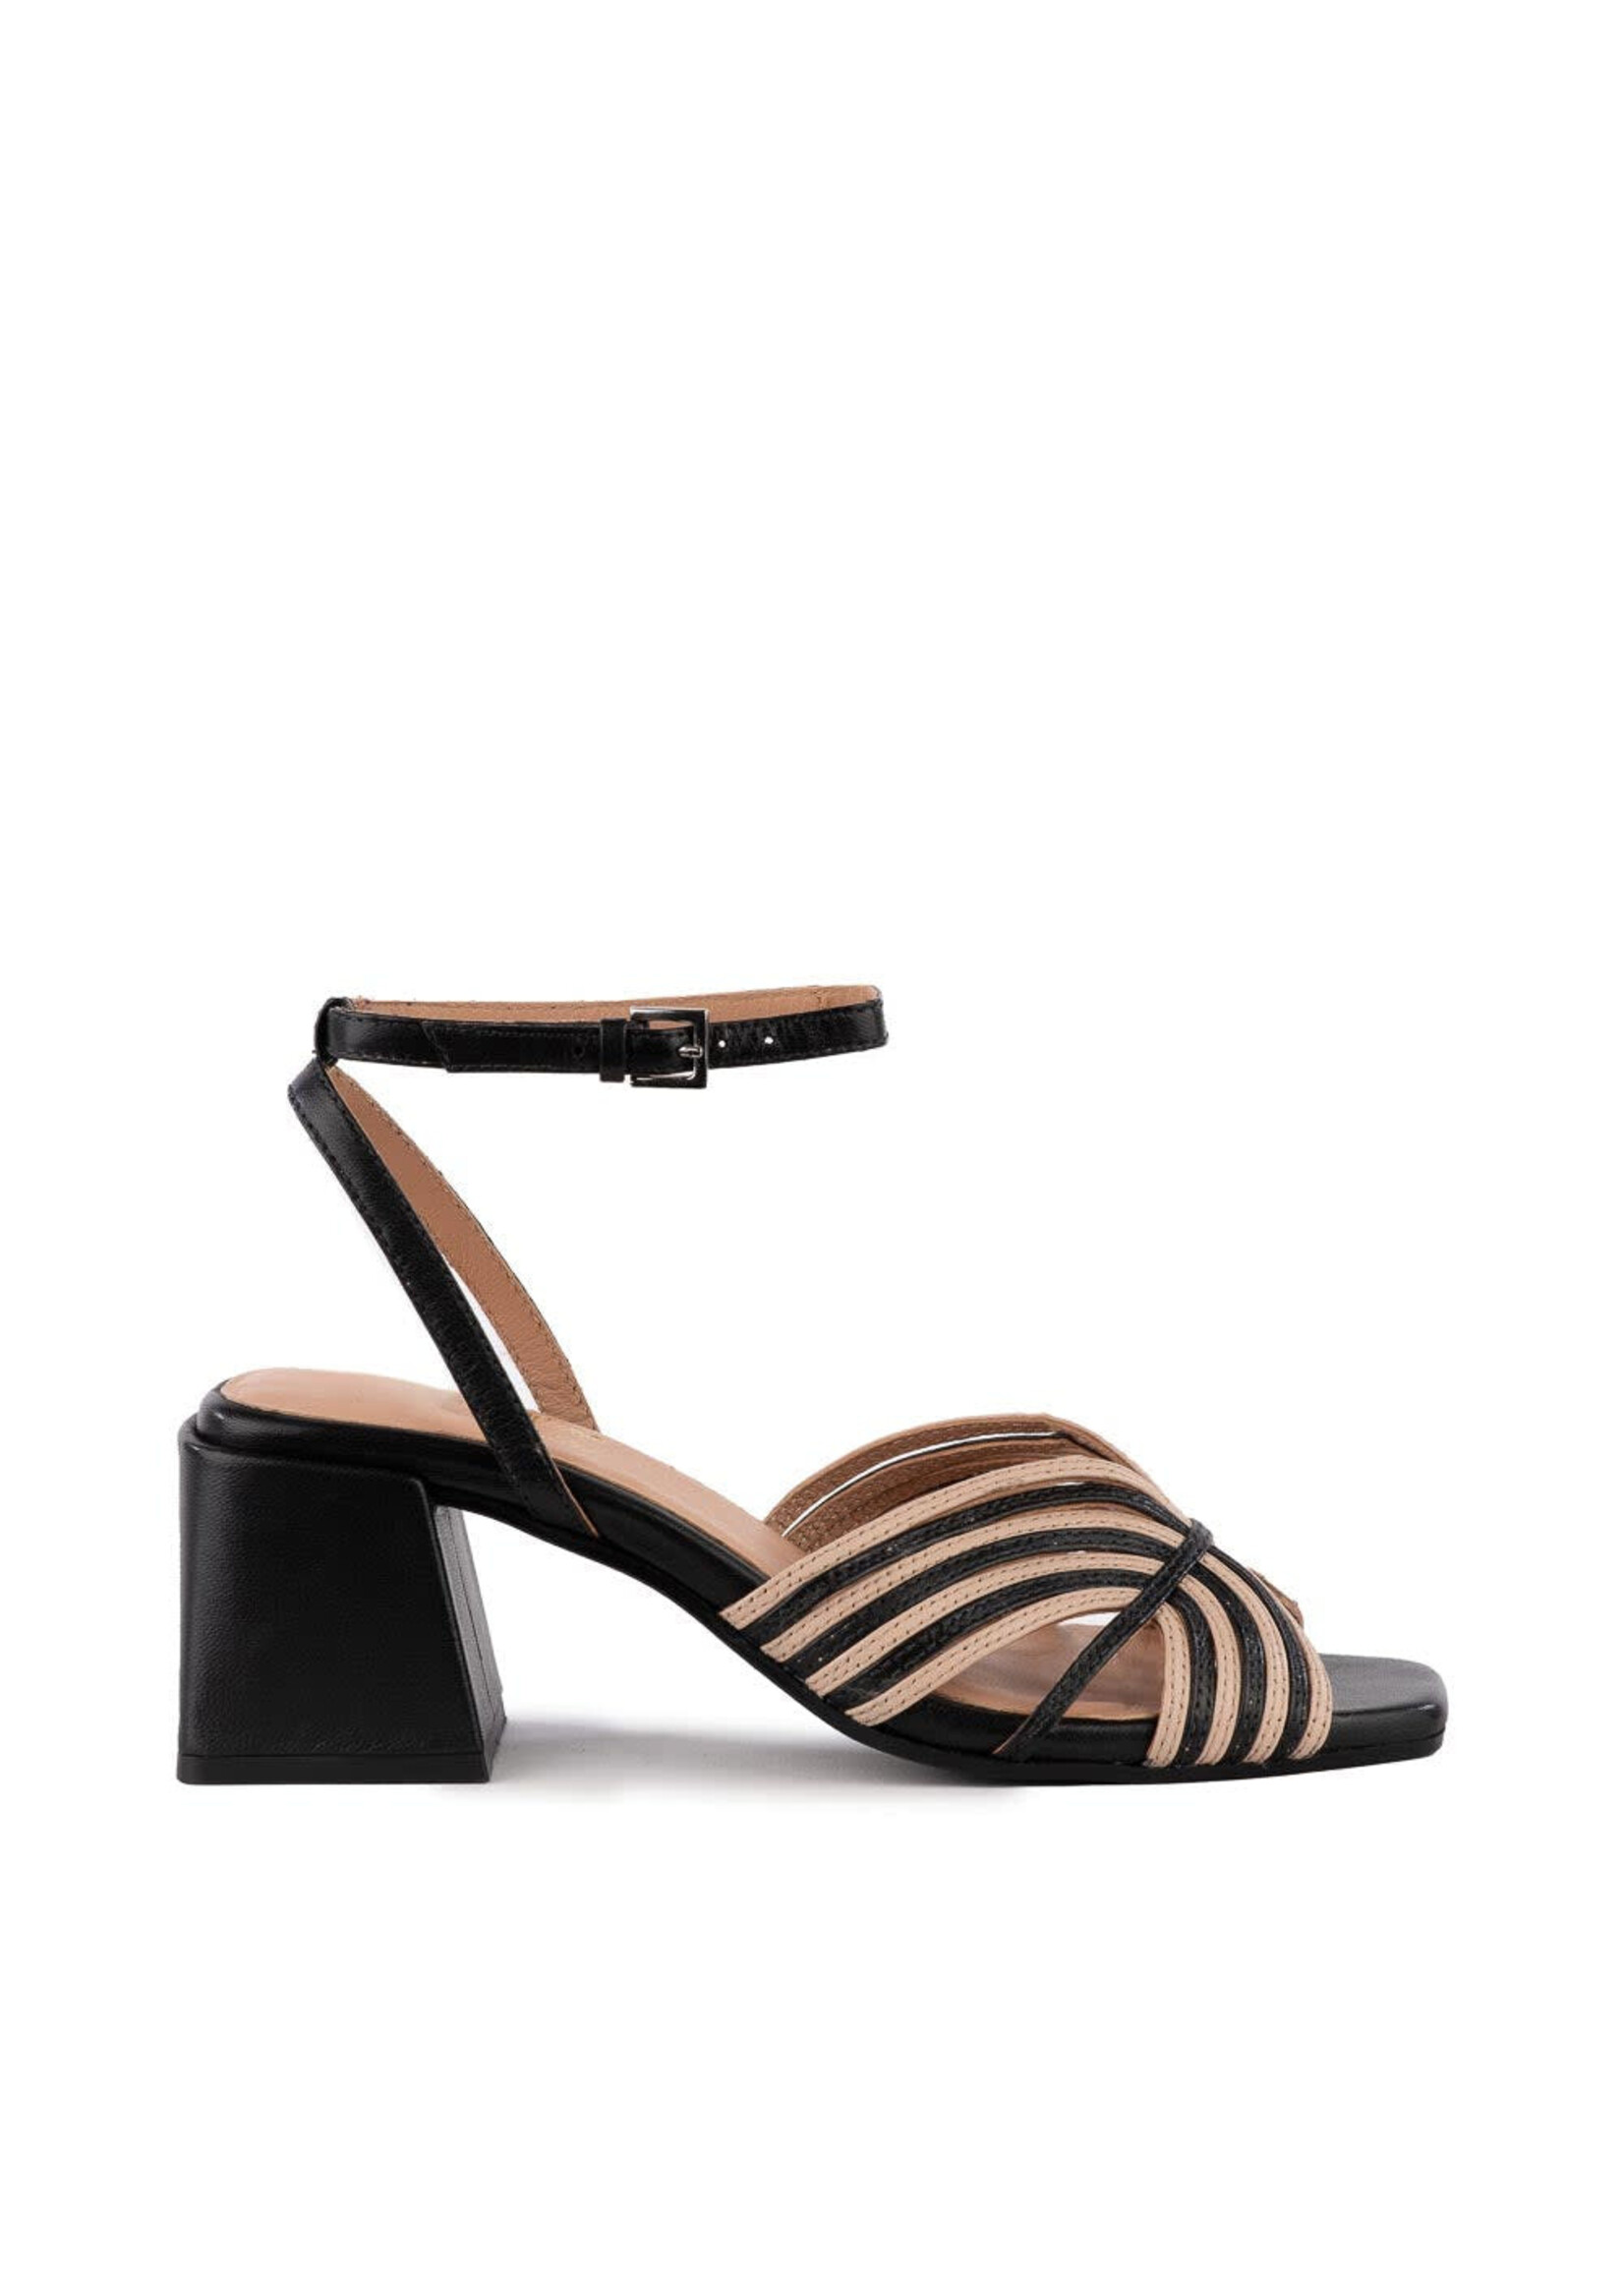 Seychelles Tender Black Off White Leather Sandals by Seychelles